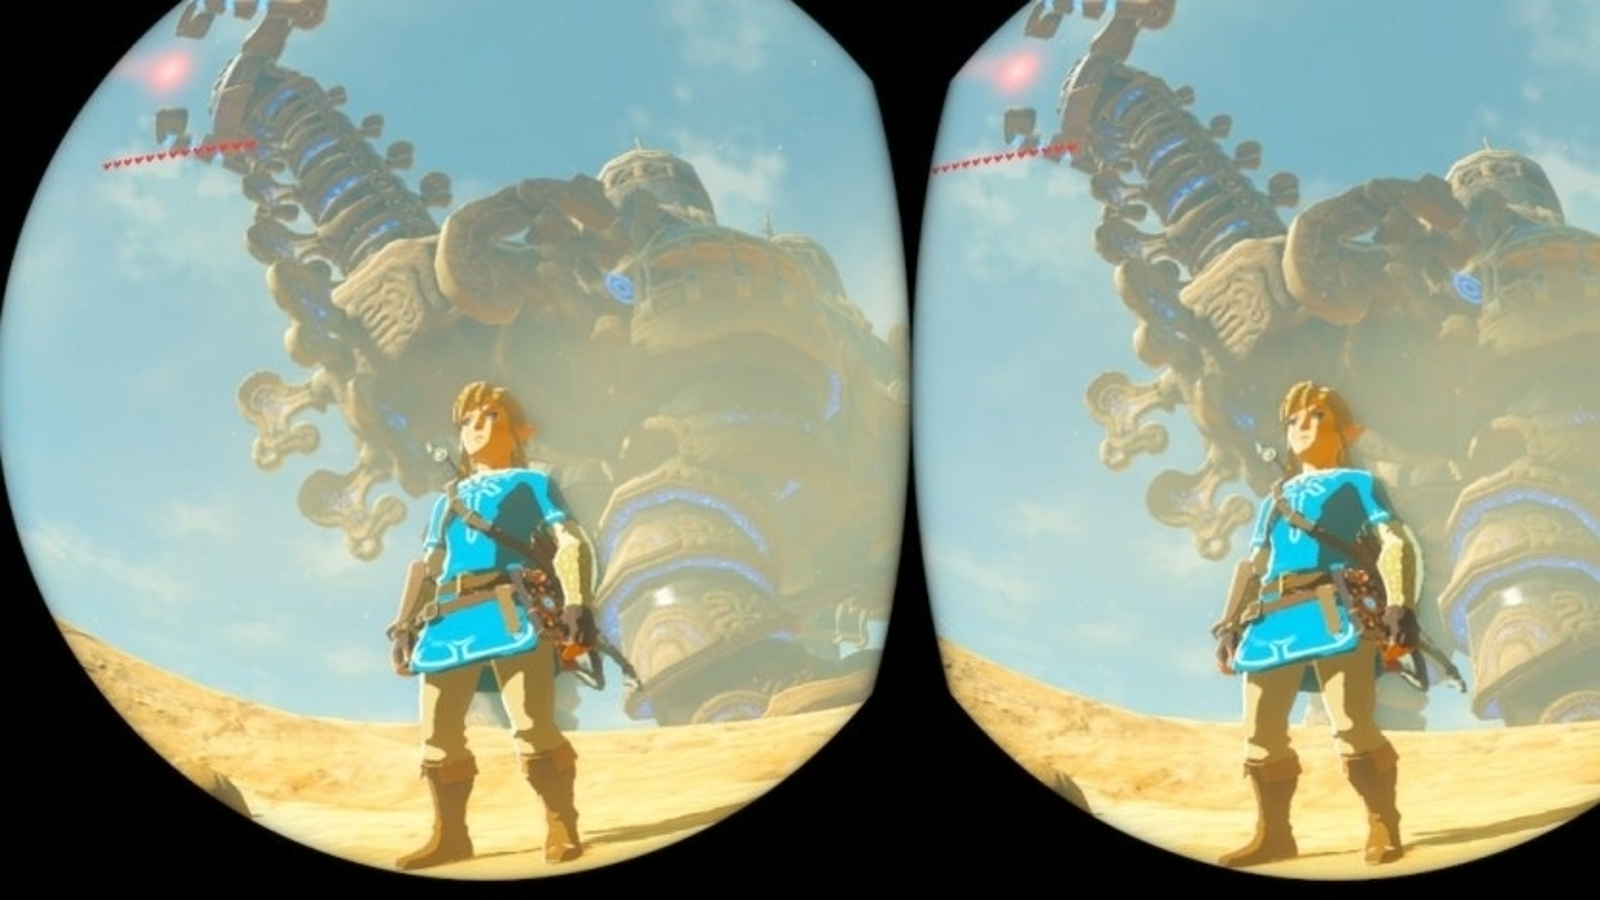 Breath of the Wild' Coming to VR With Nintendo Labo Kit